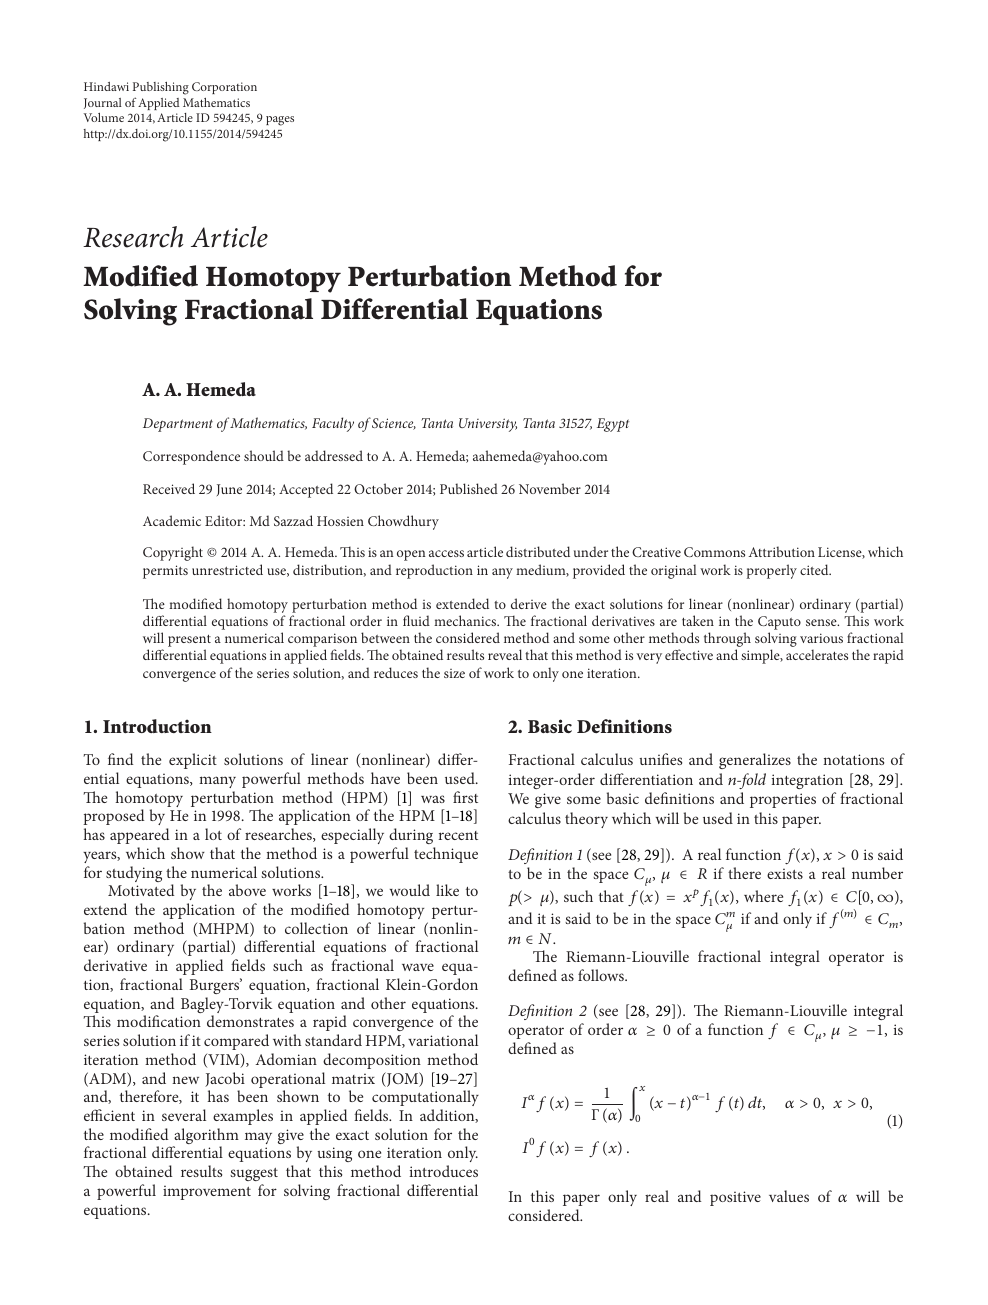 Modified Homotopy Perturbation Method For Solving Fractional Differential Equations Topic Of Research Paper In Mathematics Download Scholarly Article Pdf And Read For Free On Cyberleninka Open Science Hub